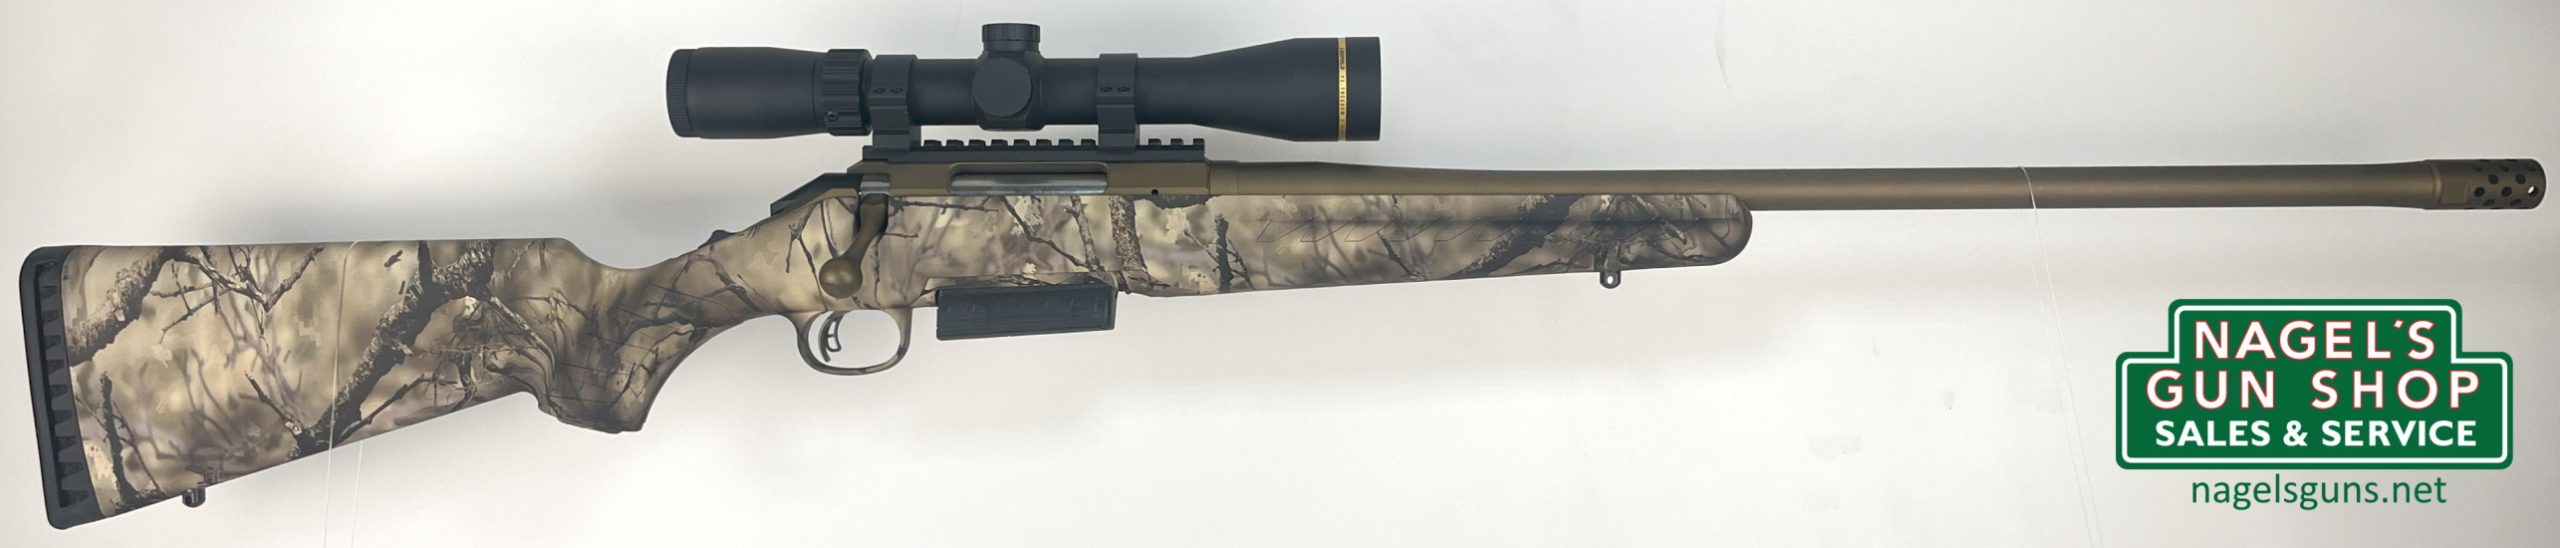 Ruger American 450 Bushmaster Rifle